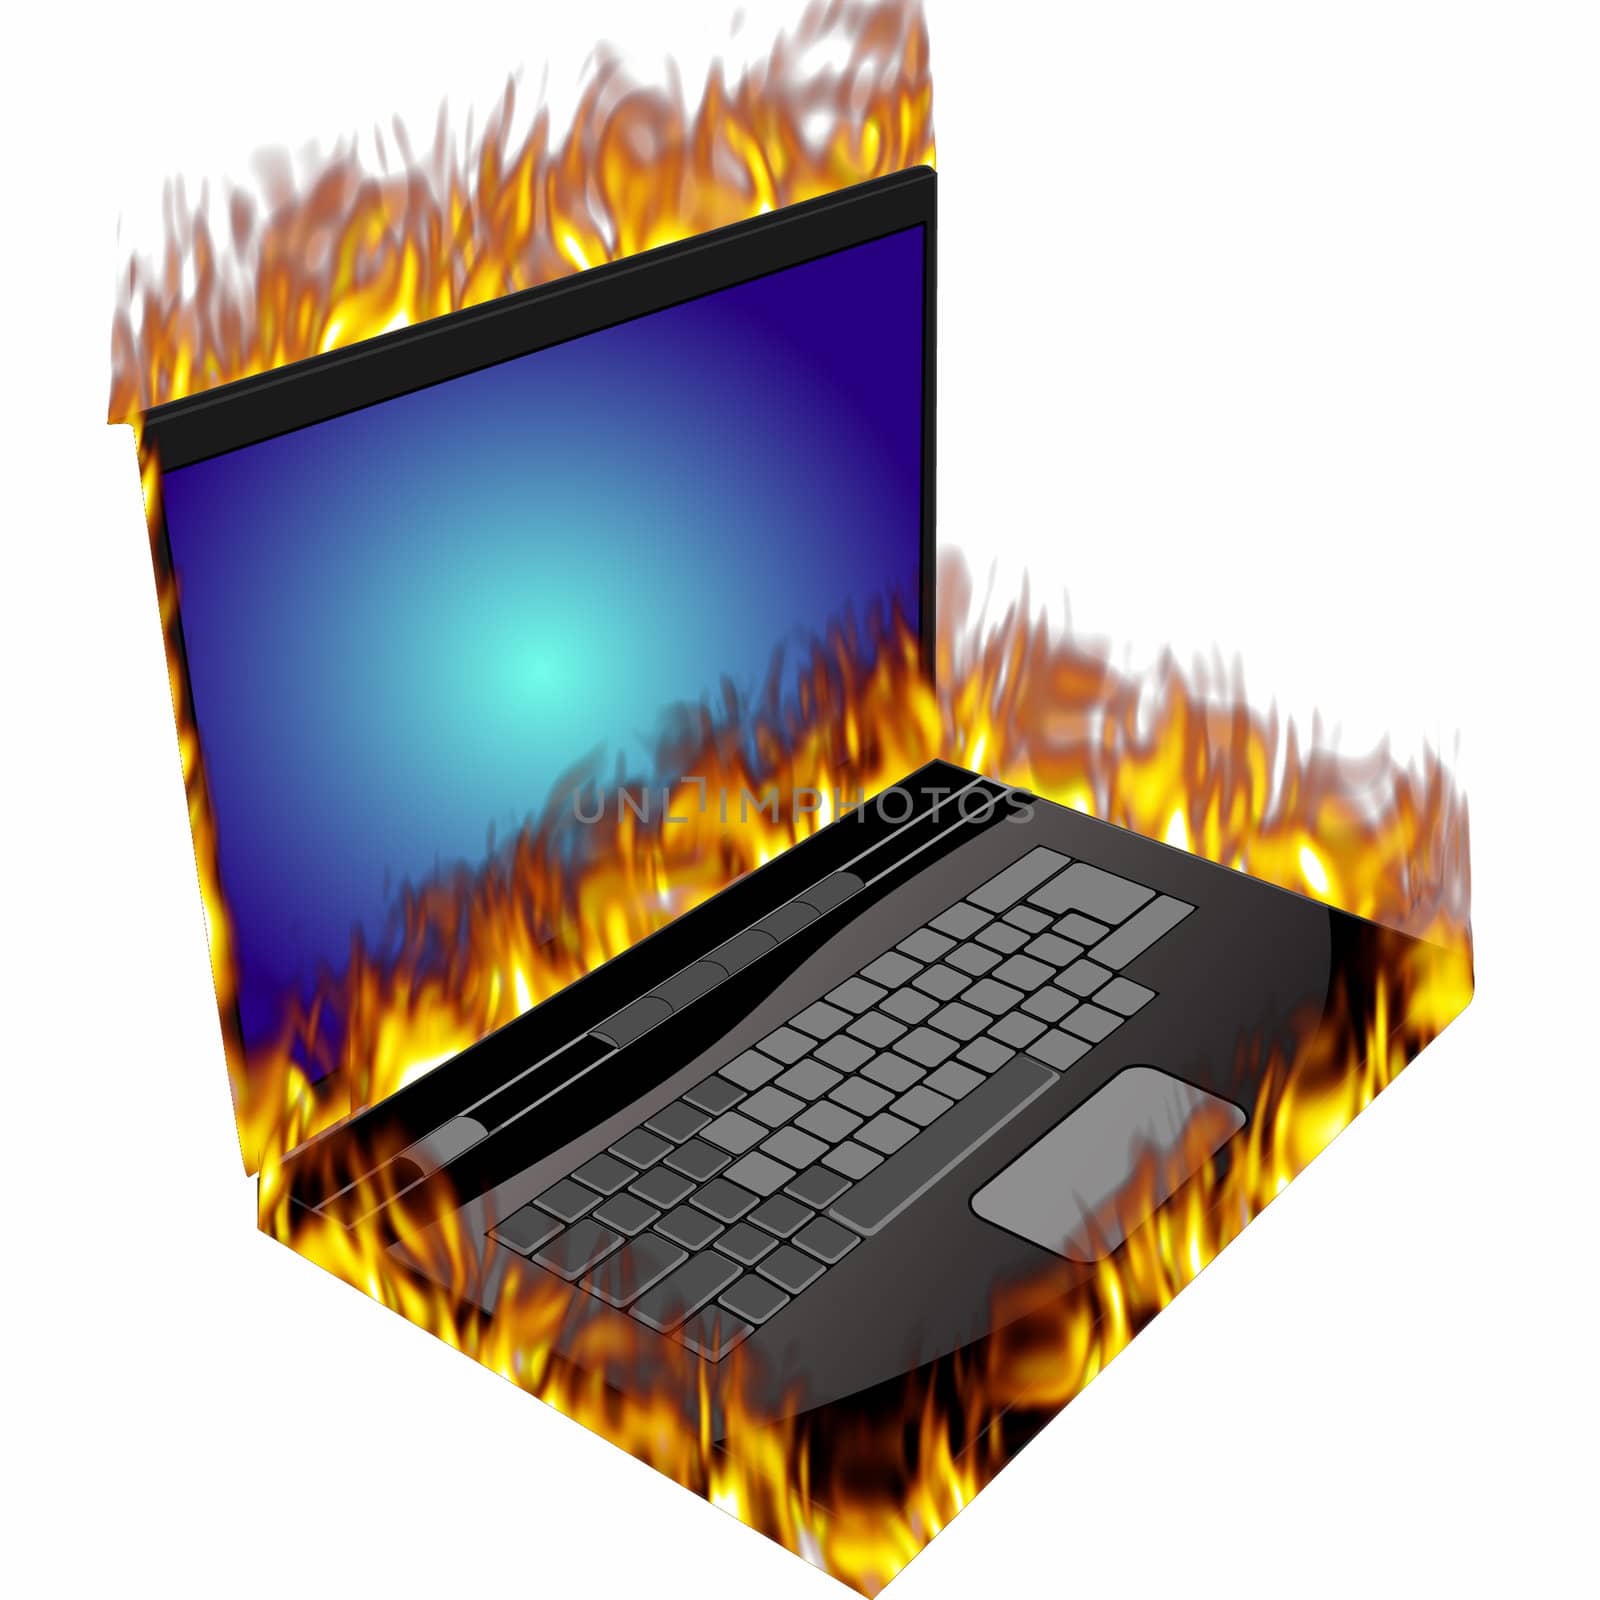 computer engulfed in flames